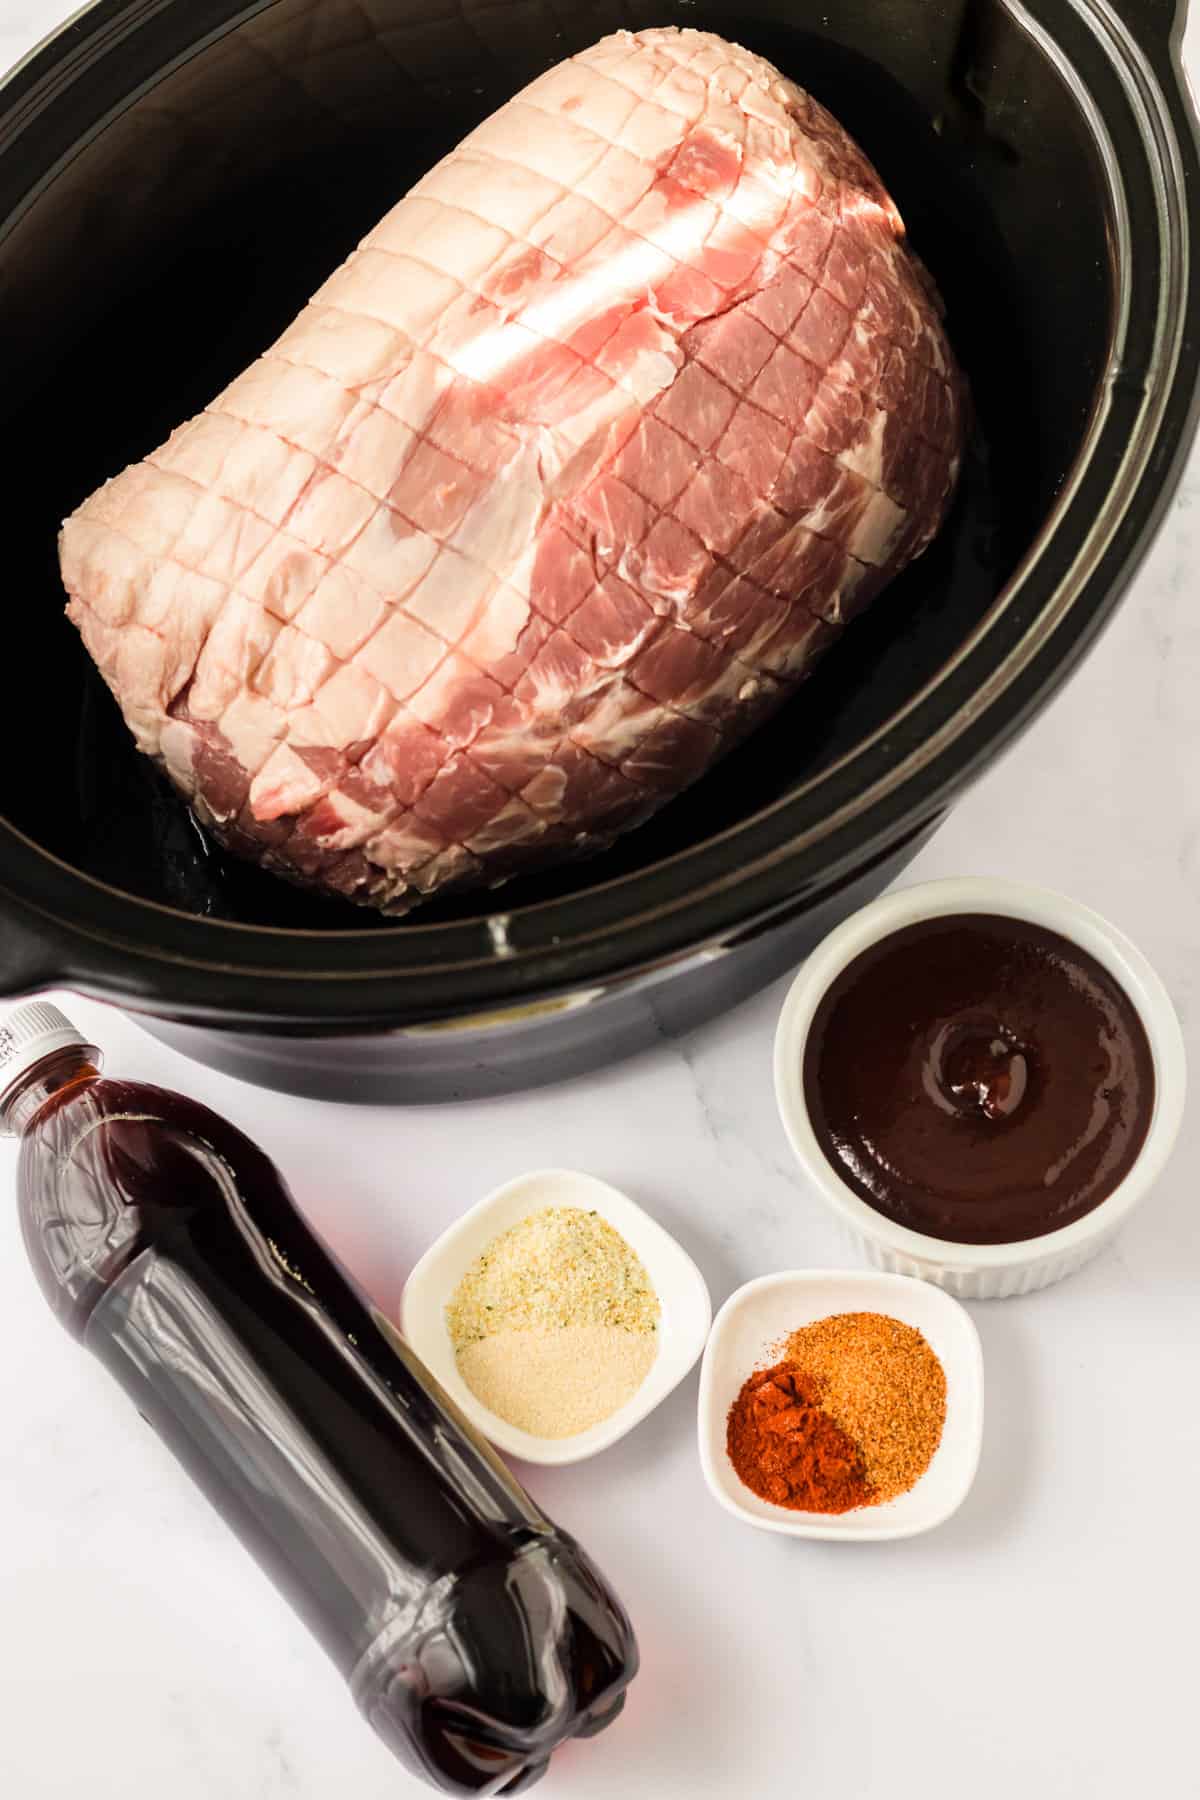 Pork roast in slow cooker with remaining ingredients beside it.